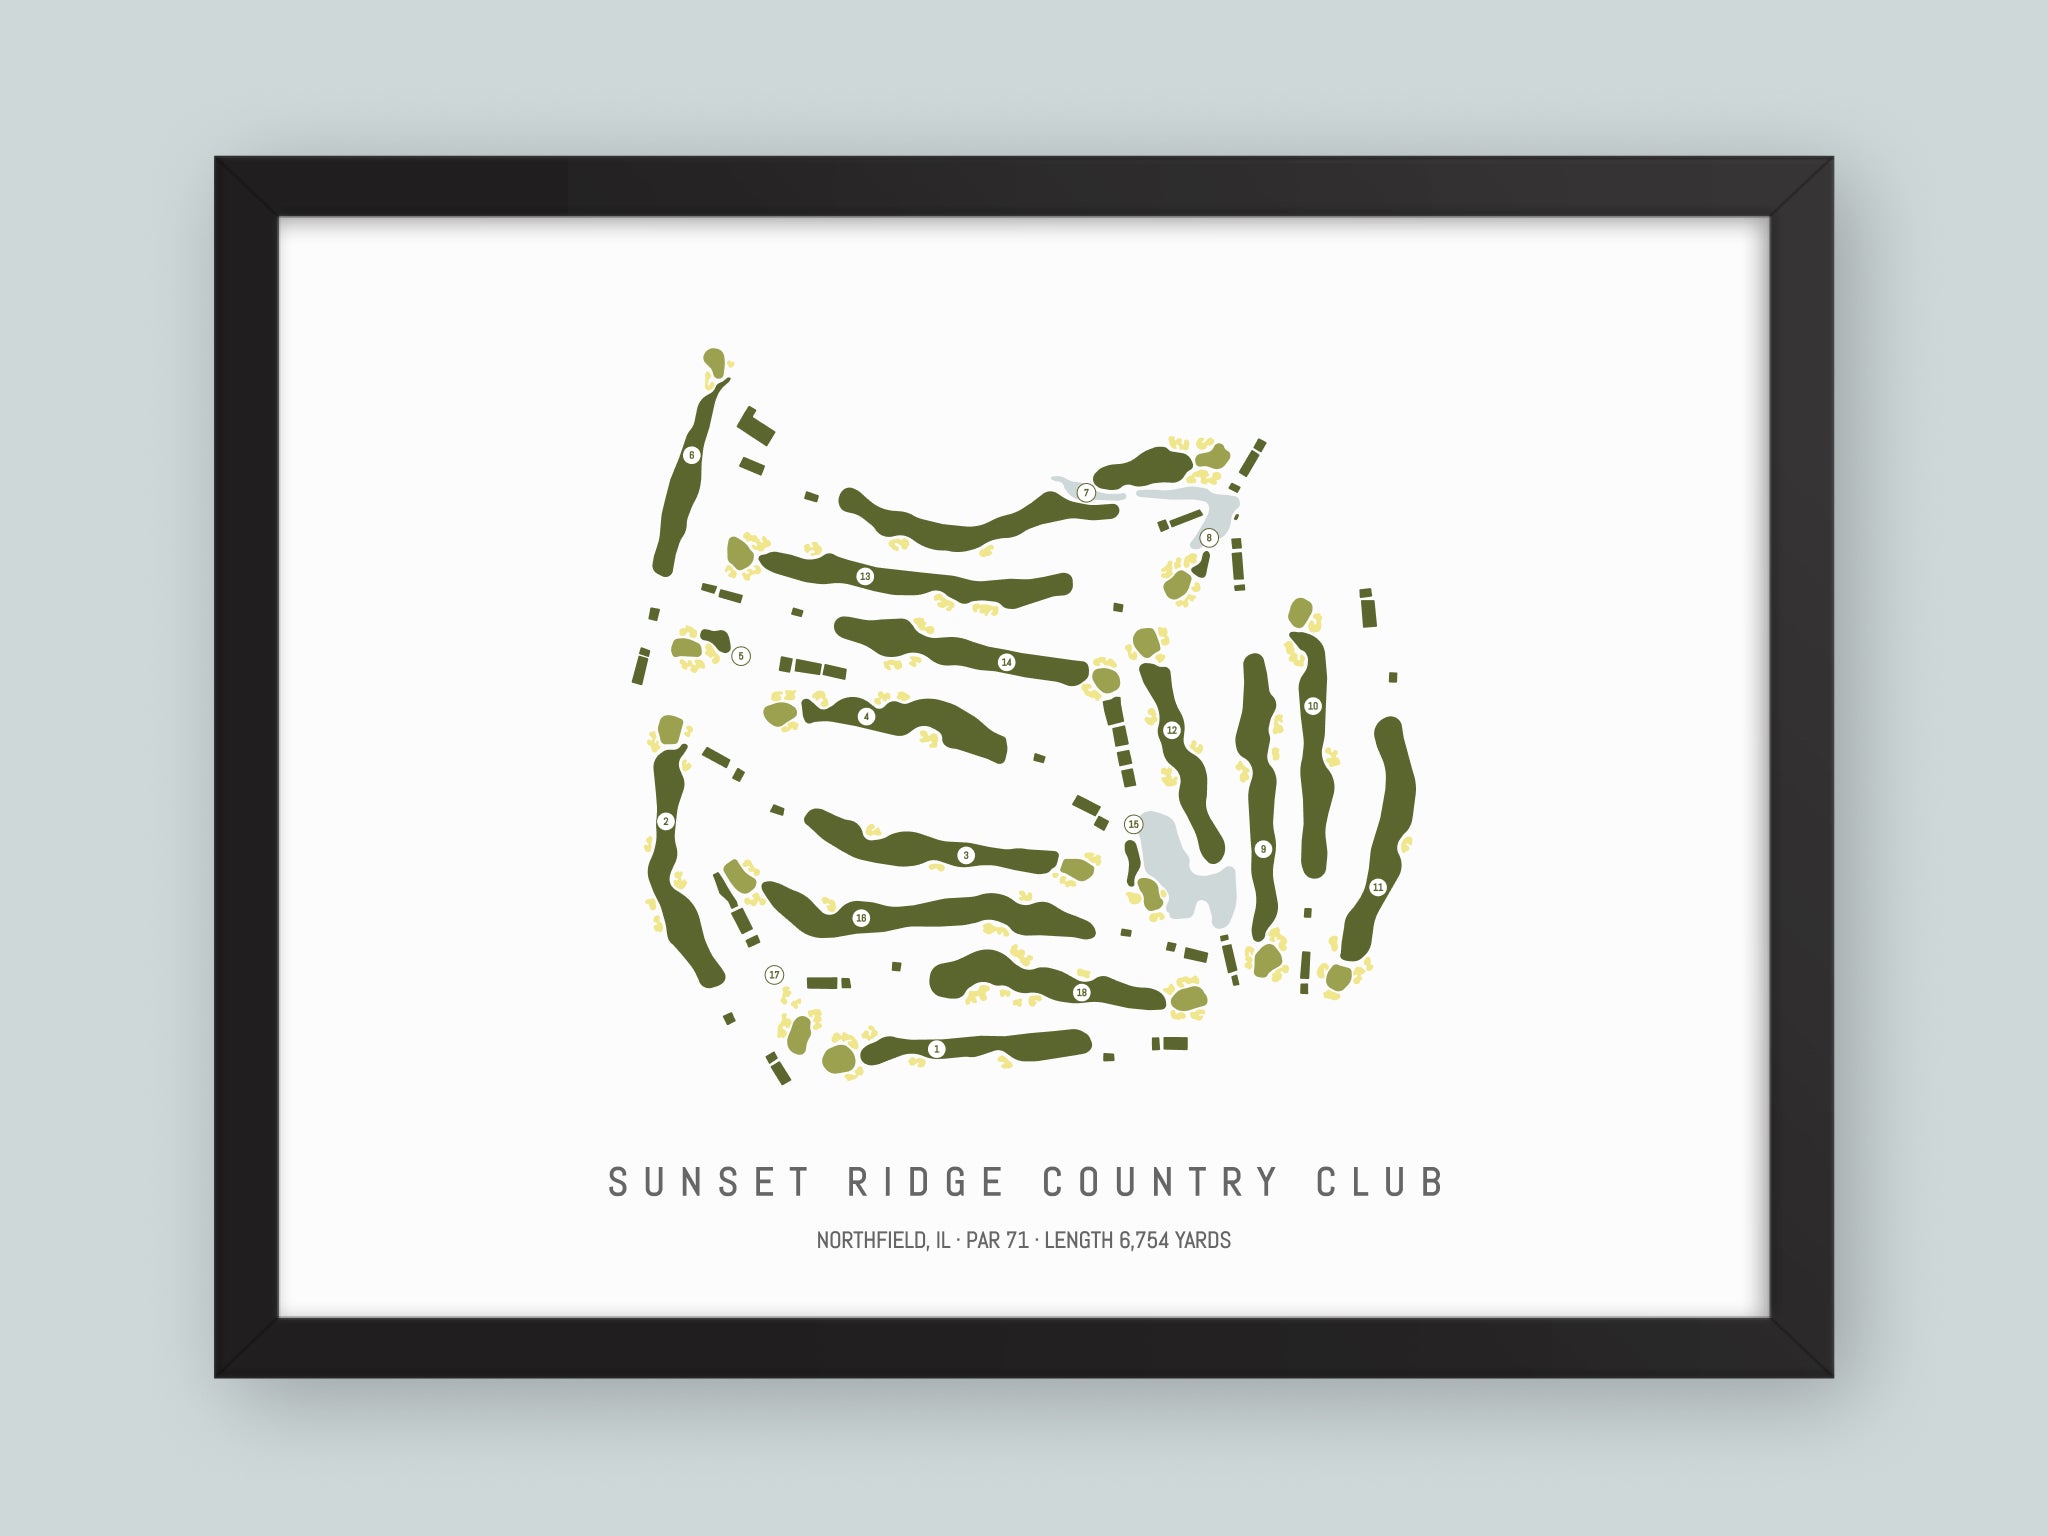 Sunset-Ridge-Country-Club-IL--Black-Frame-24x18-With-Hole-Numbers